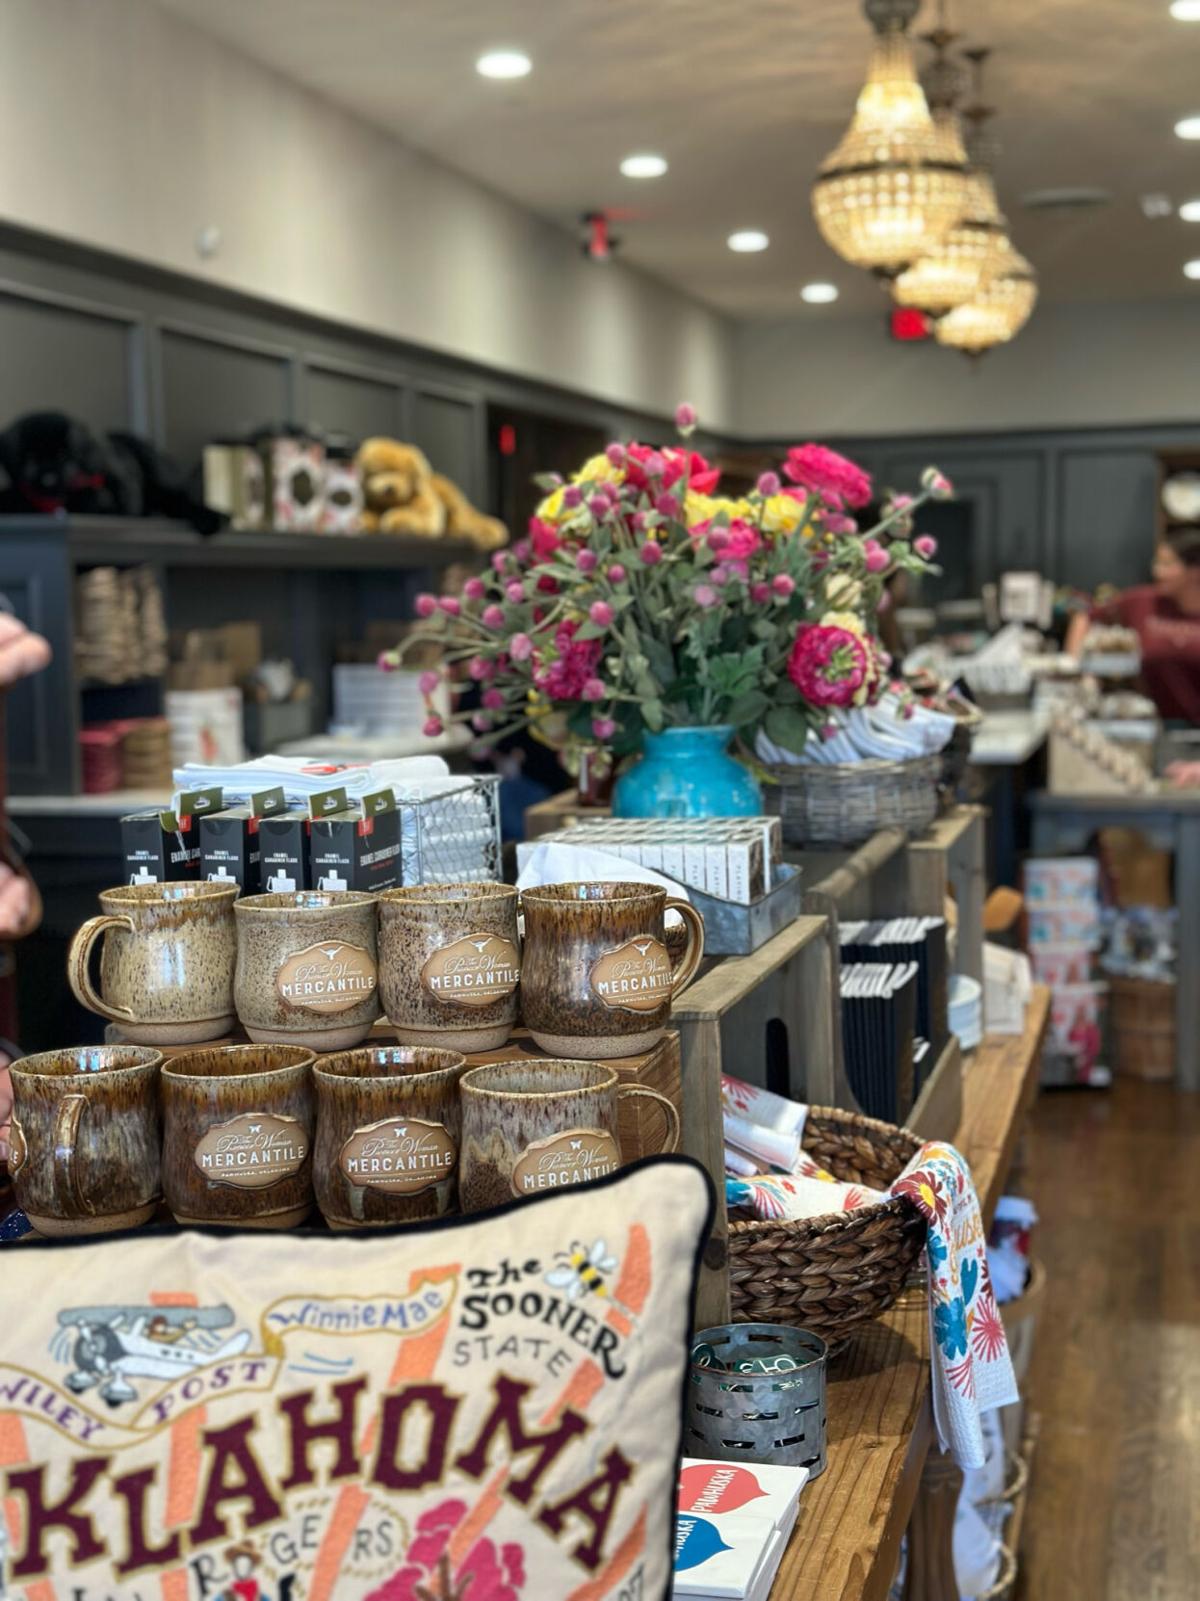 The Pioneer Woman's Mercantile - Southern Crush at Home